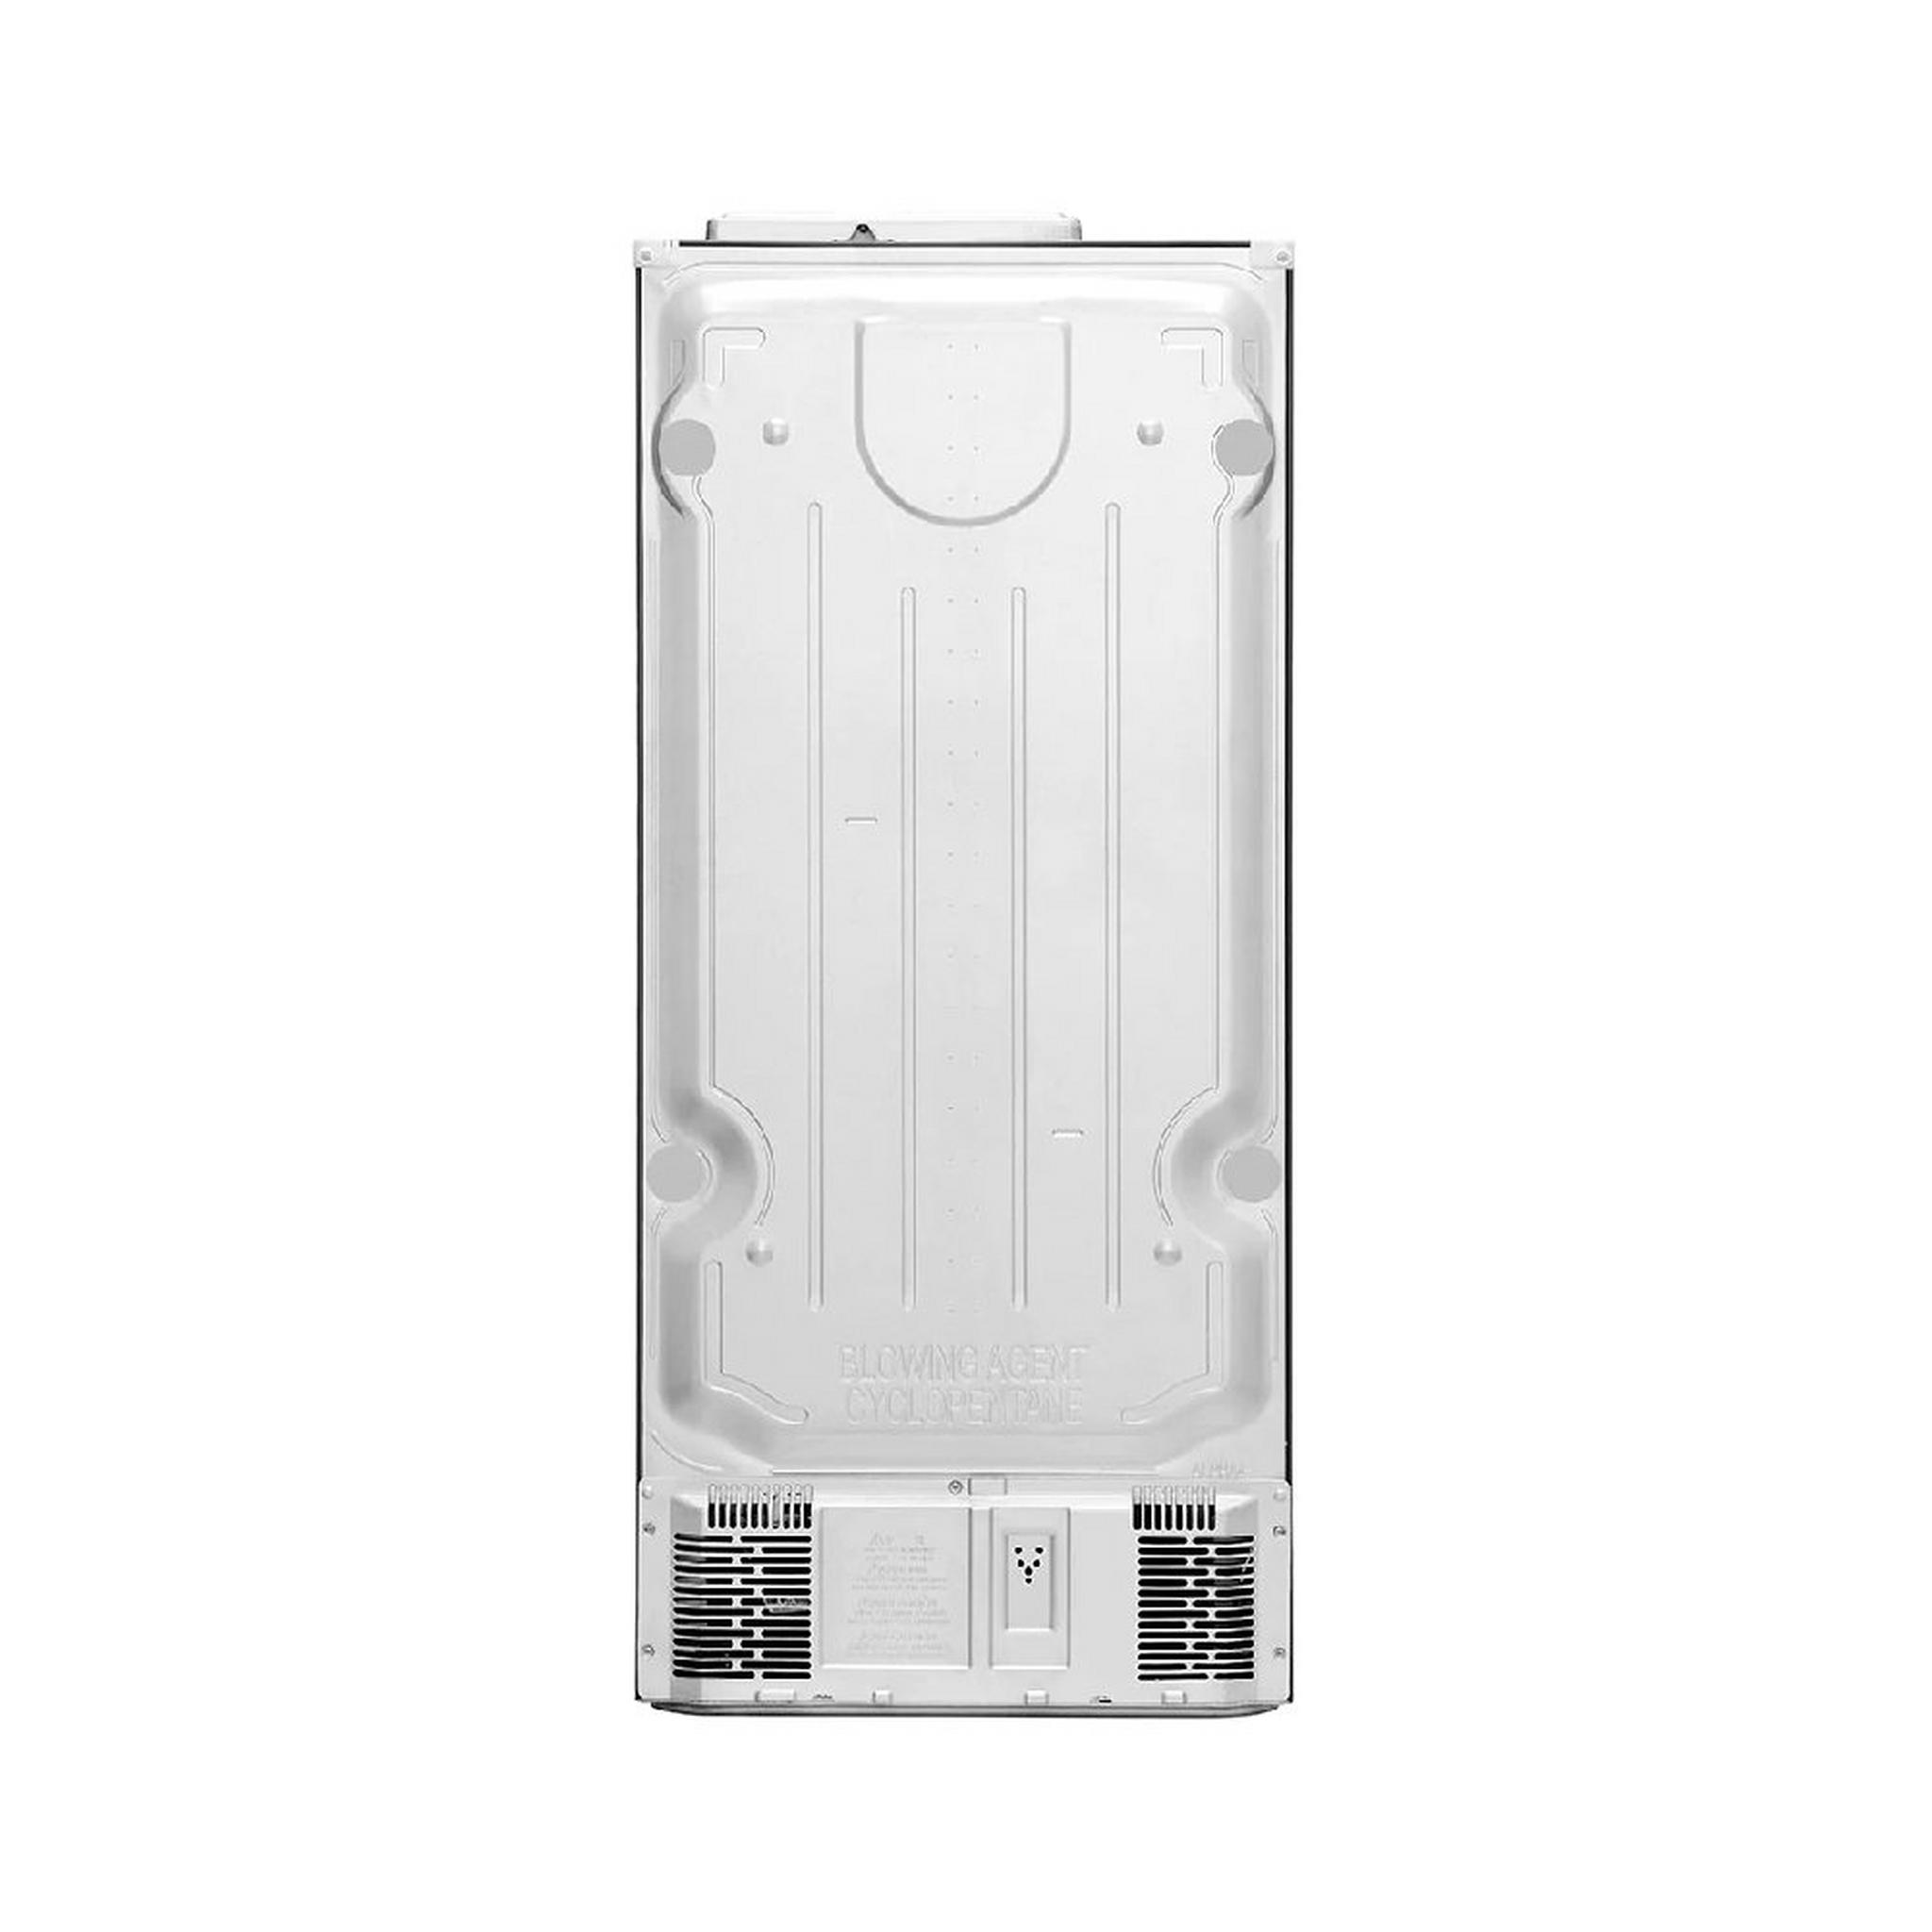 LG Top Mount Refrigerator, 18 CFT, 509L, GN-C782HQCL – Silver